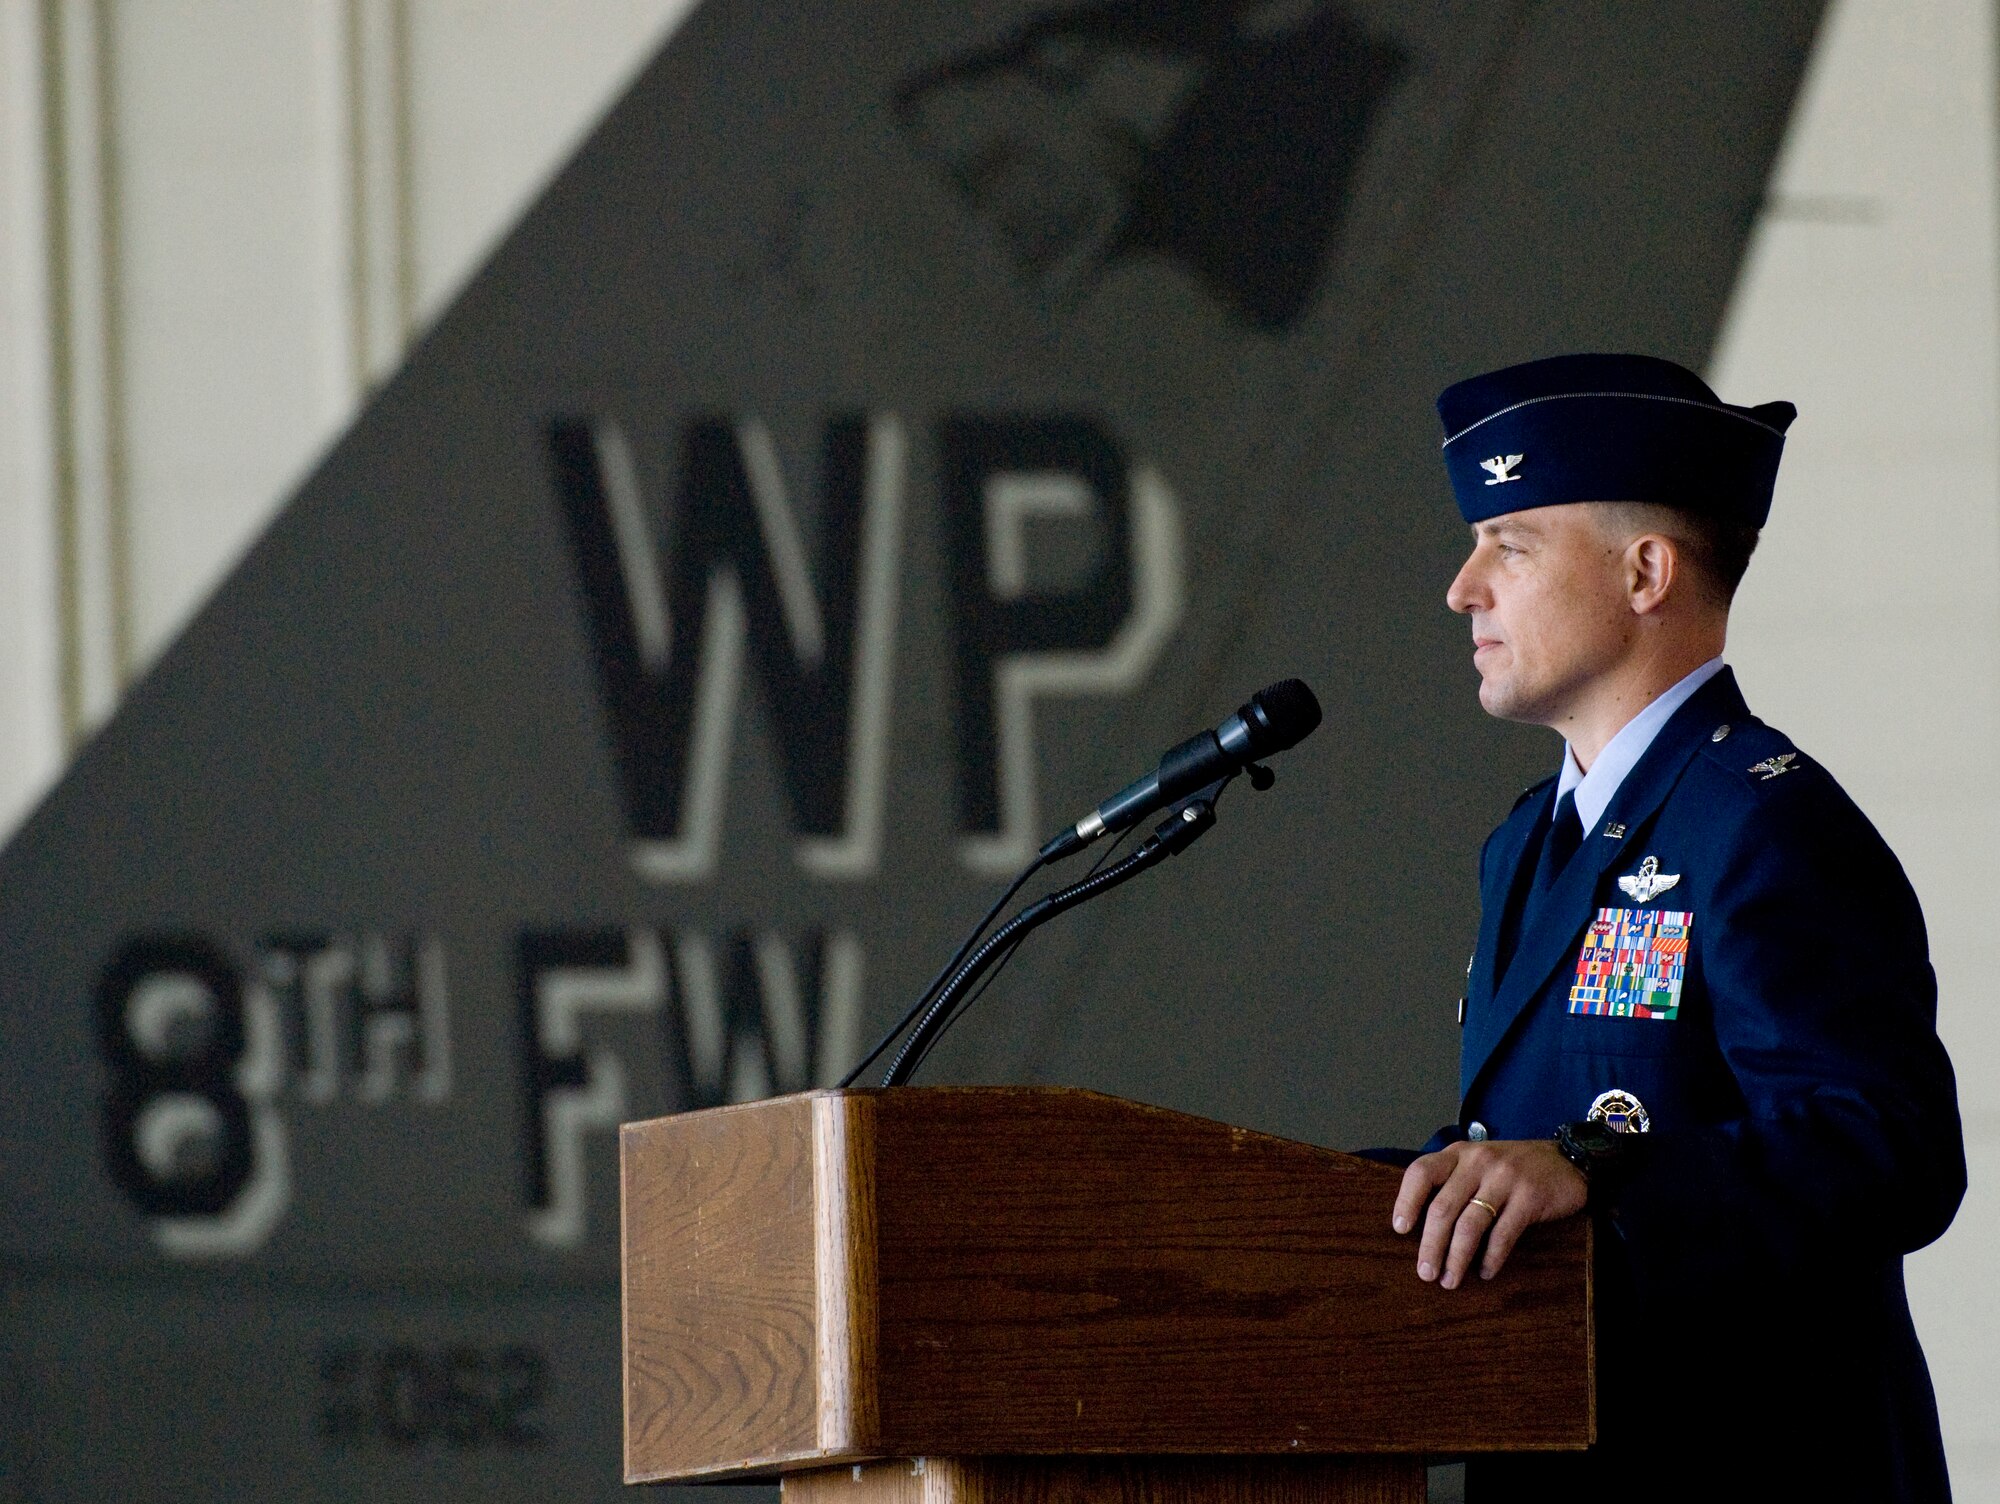 KUNSAN AIR BASE, Republic of Korea -- Col. Robert Givens 8th Fighter Wing commander, addresses his wing for the first time during the 8th Fighter Wing change of command Sept. 15. Colonel Givens will be the 49th "Wolf" to command the 8th Fighter Wing.(U.S. Air Force photo/ Senior Airman Jonathan Steffen)